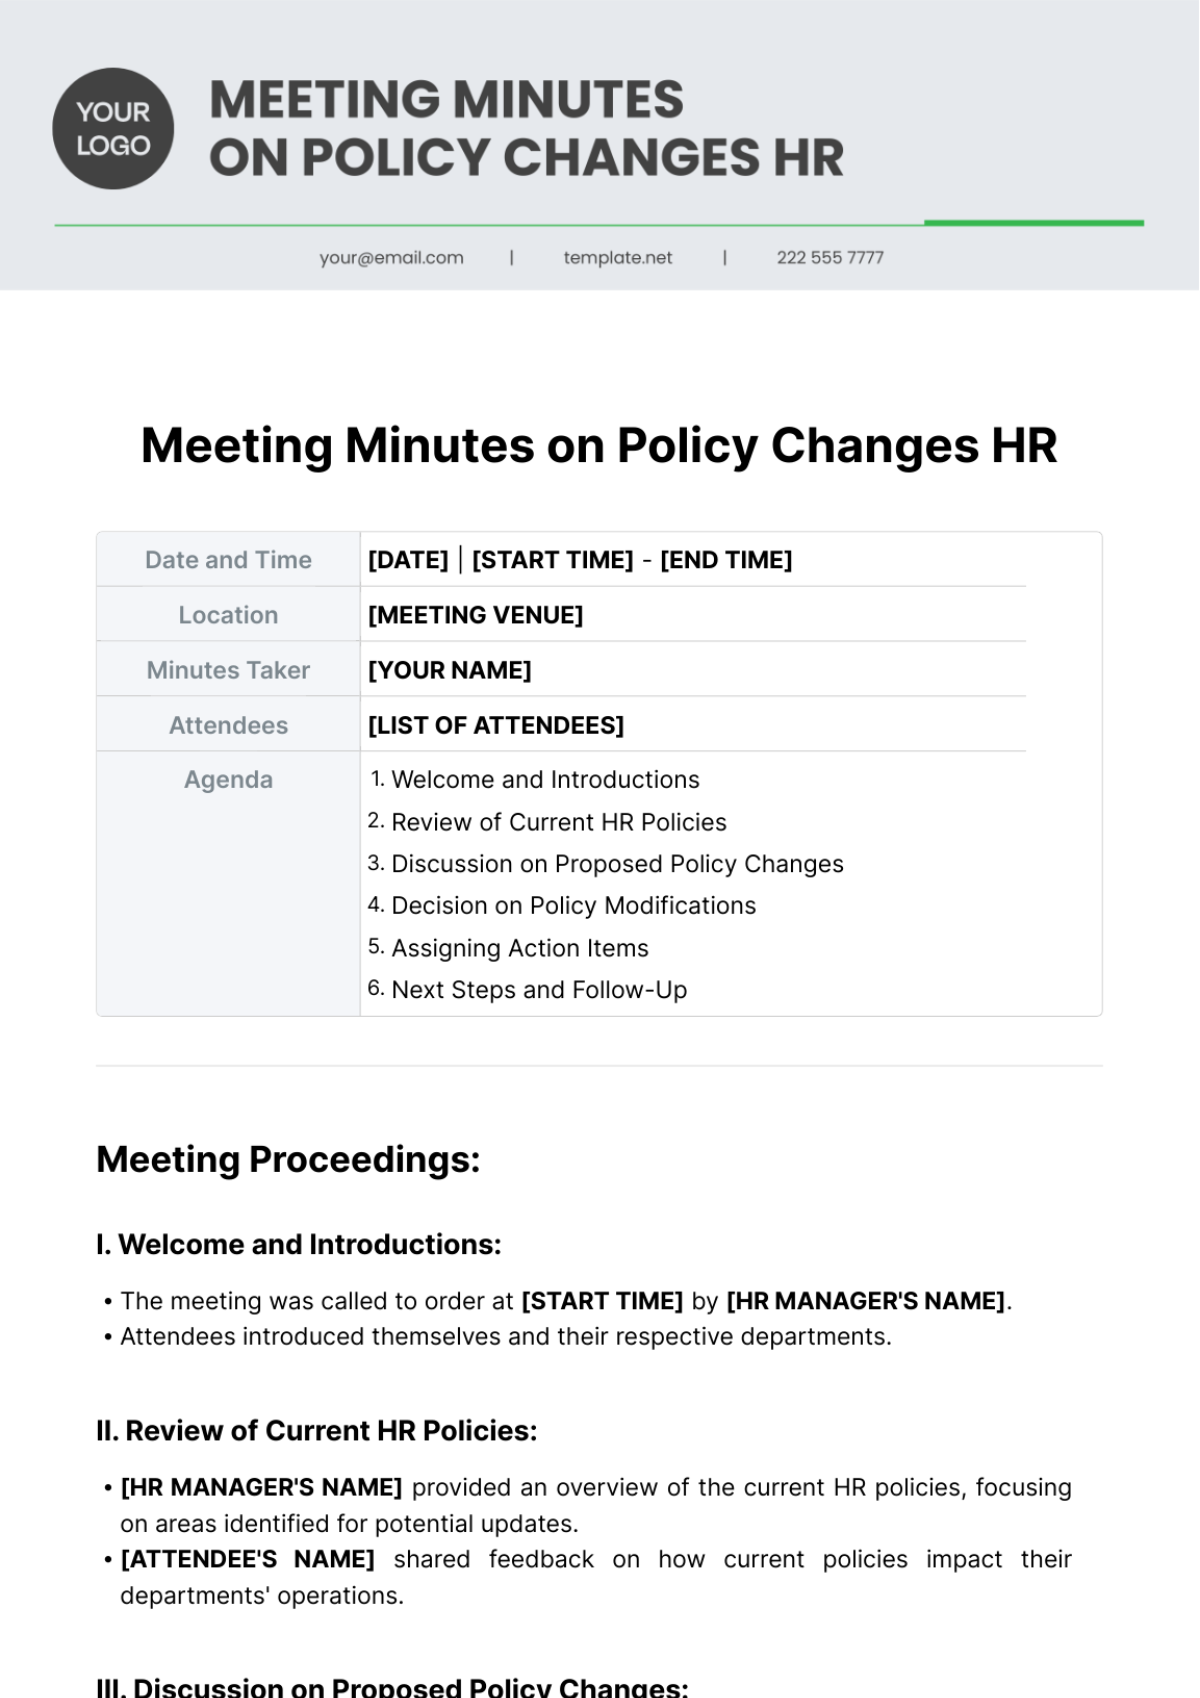 Meeting Minutes on Policy Changes HR Template